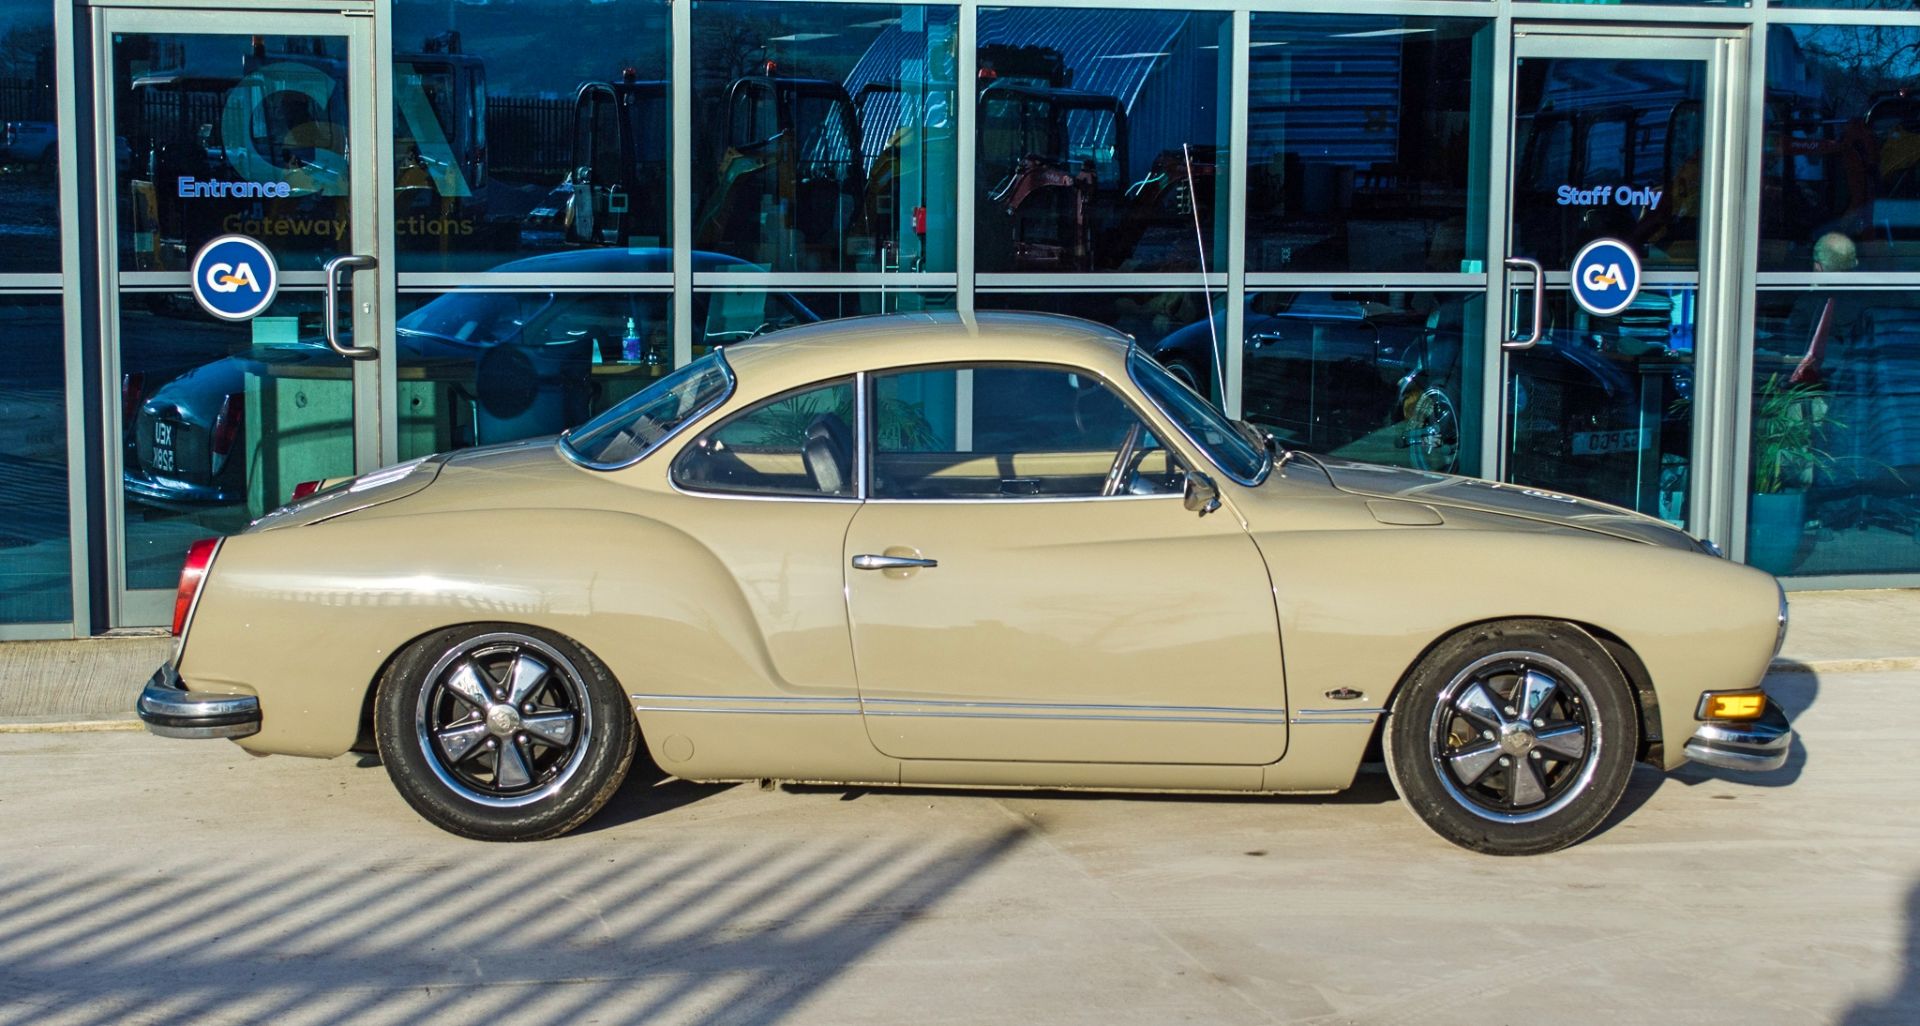 1972 Volkswagen Karmann Ghia 1641cc two door coupe - Image 14 of 52